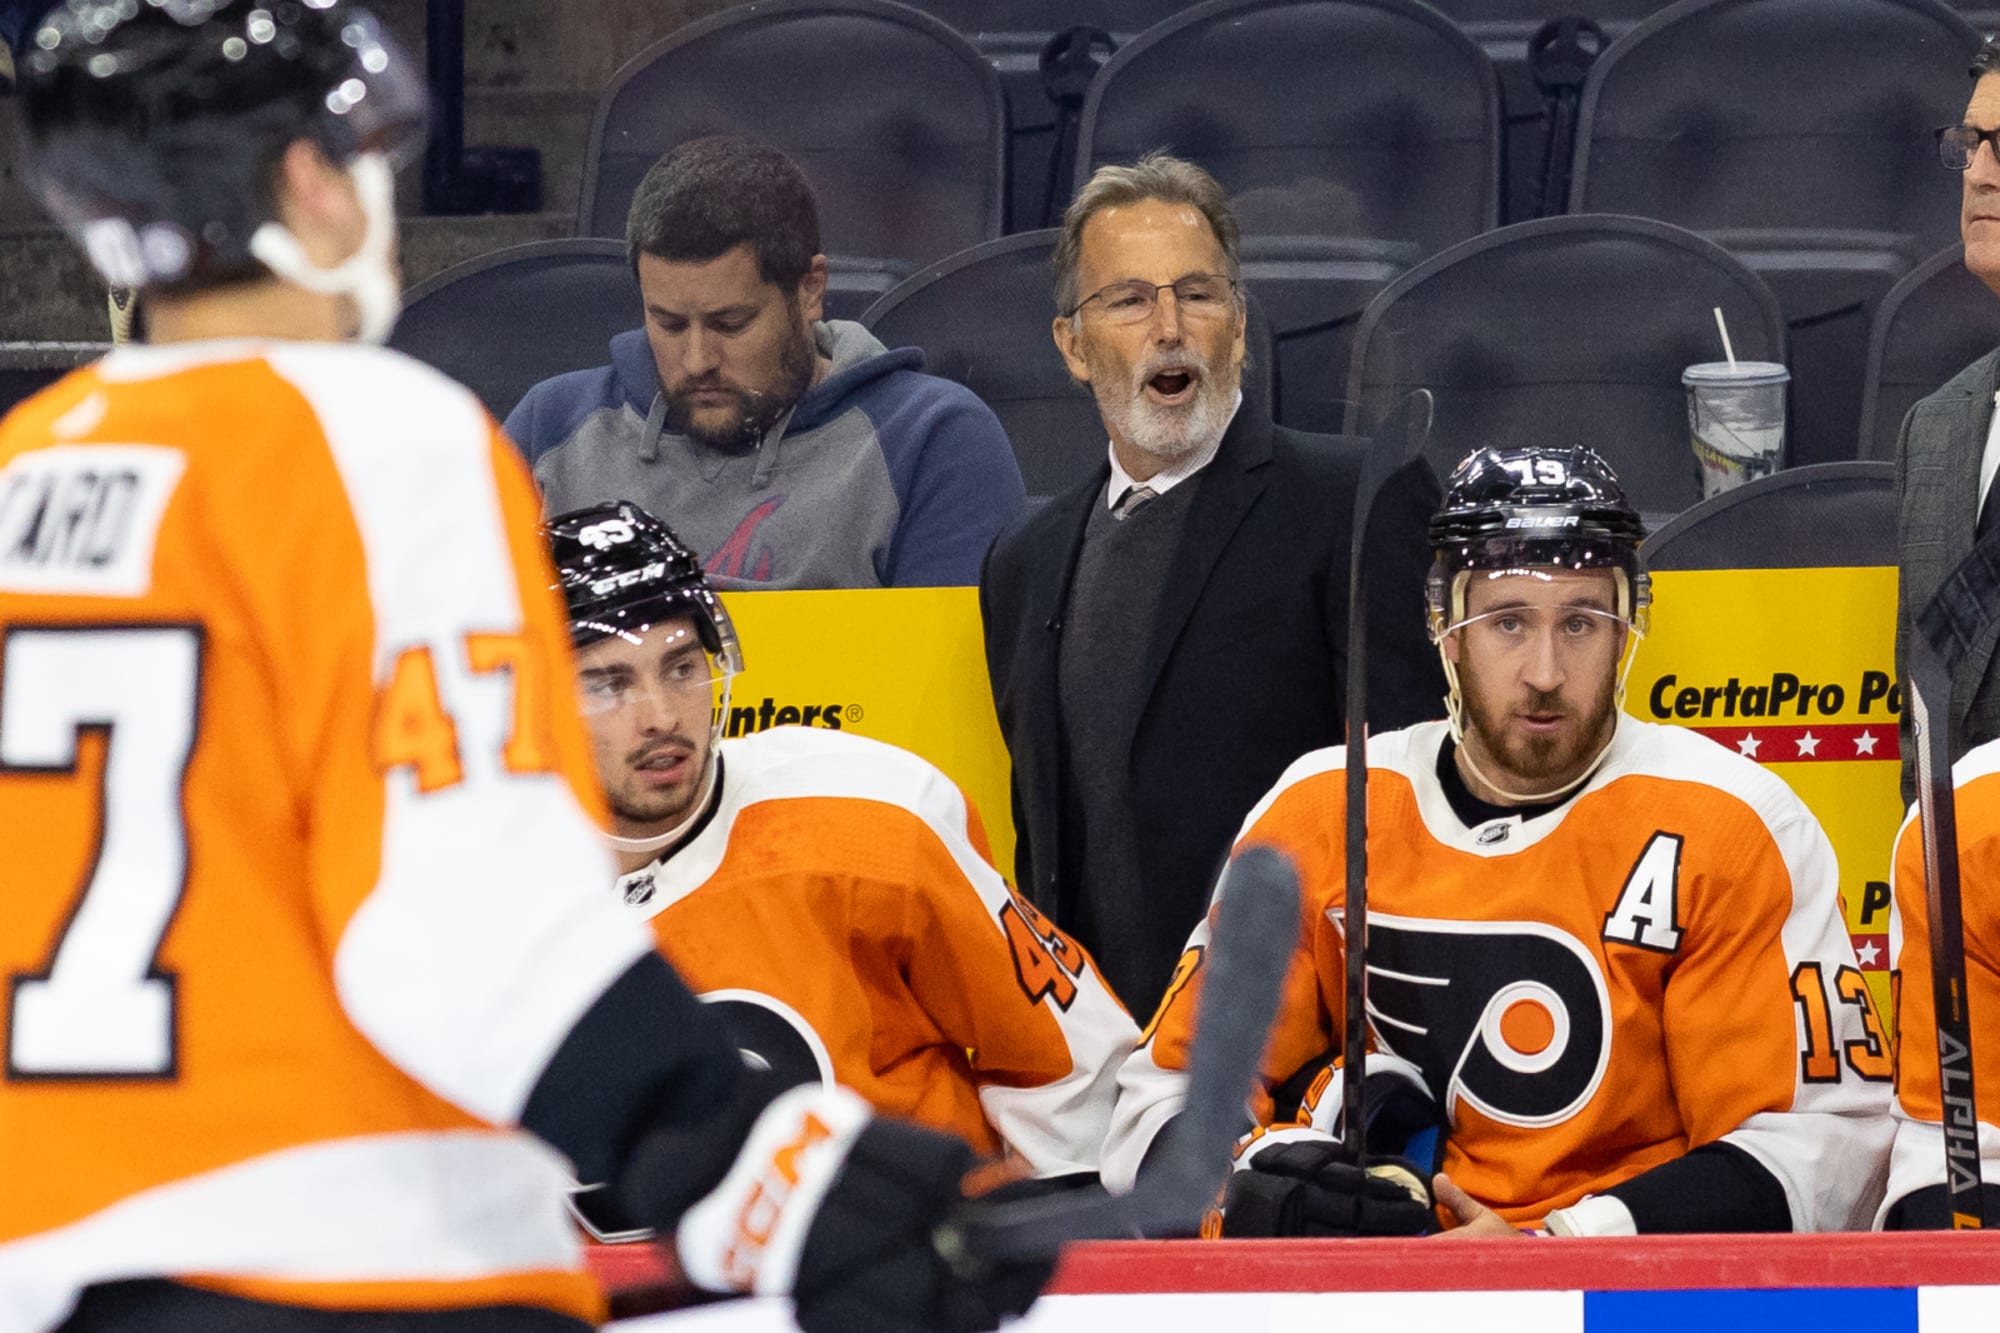 Flyers' Season Preview: What Can We Expect From Sean Couturier?